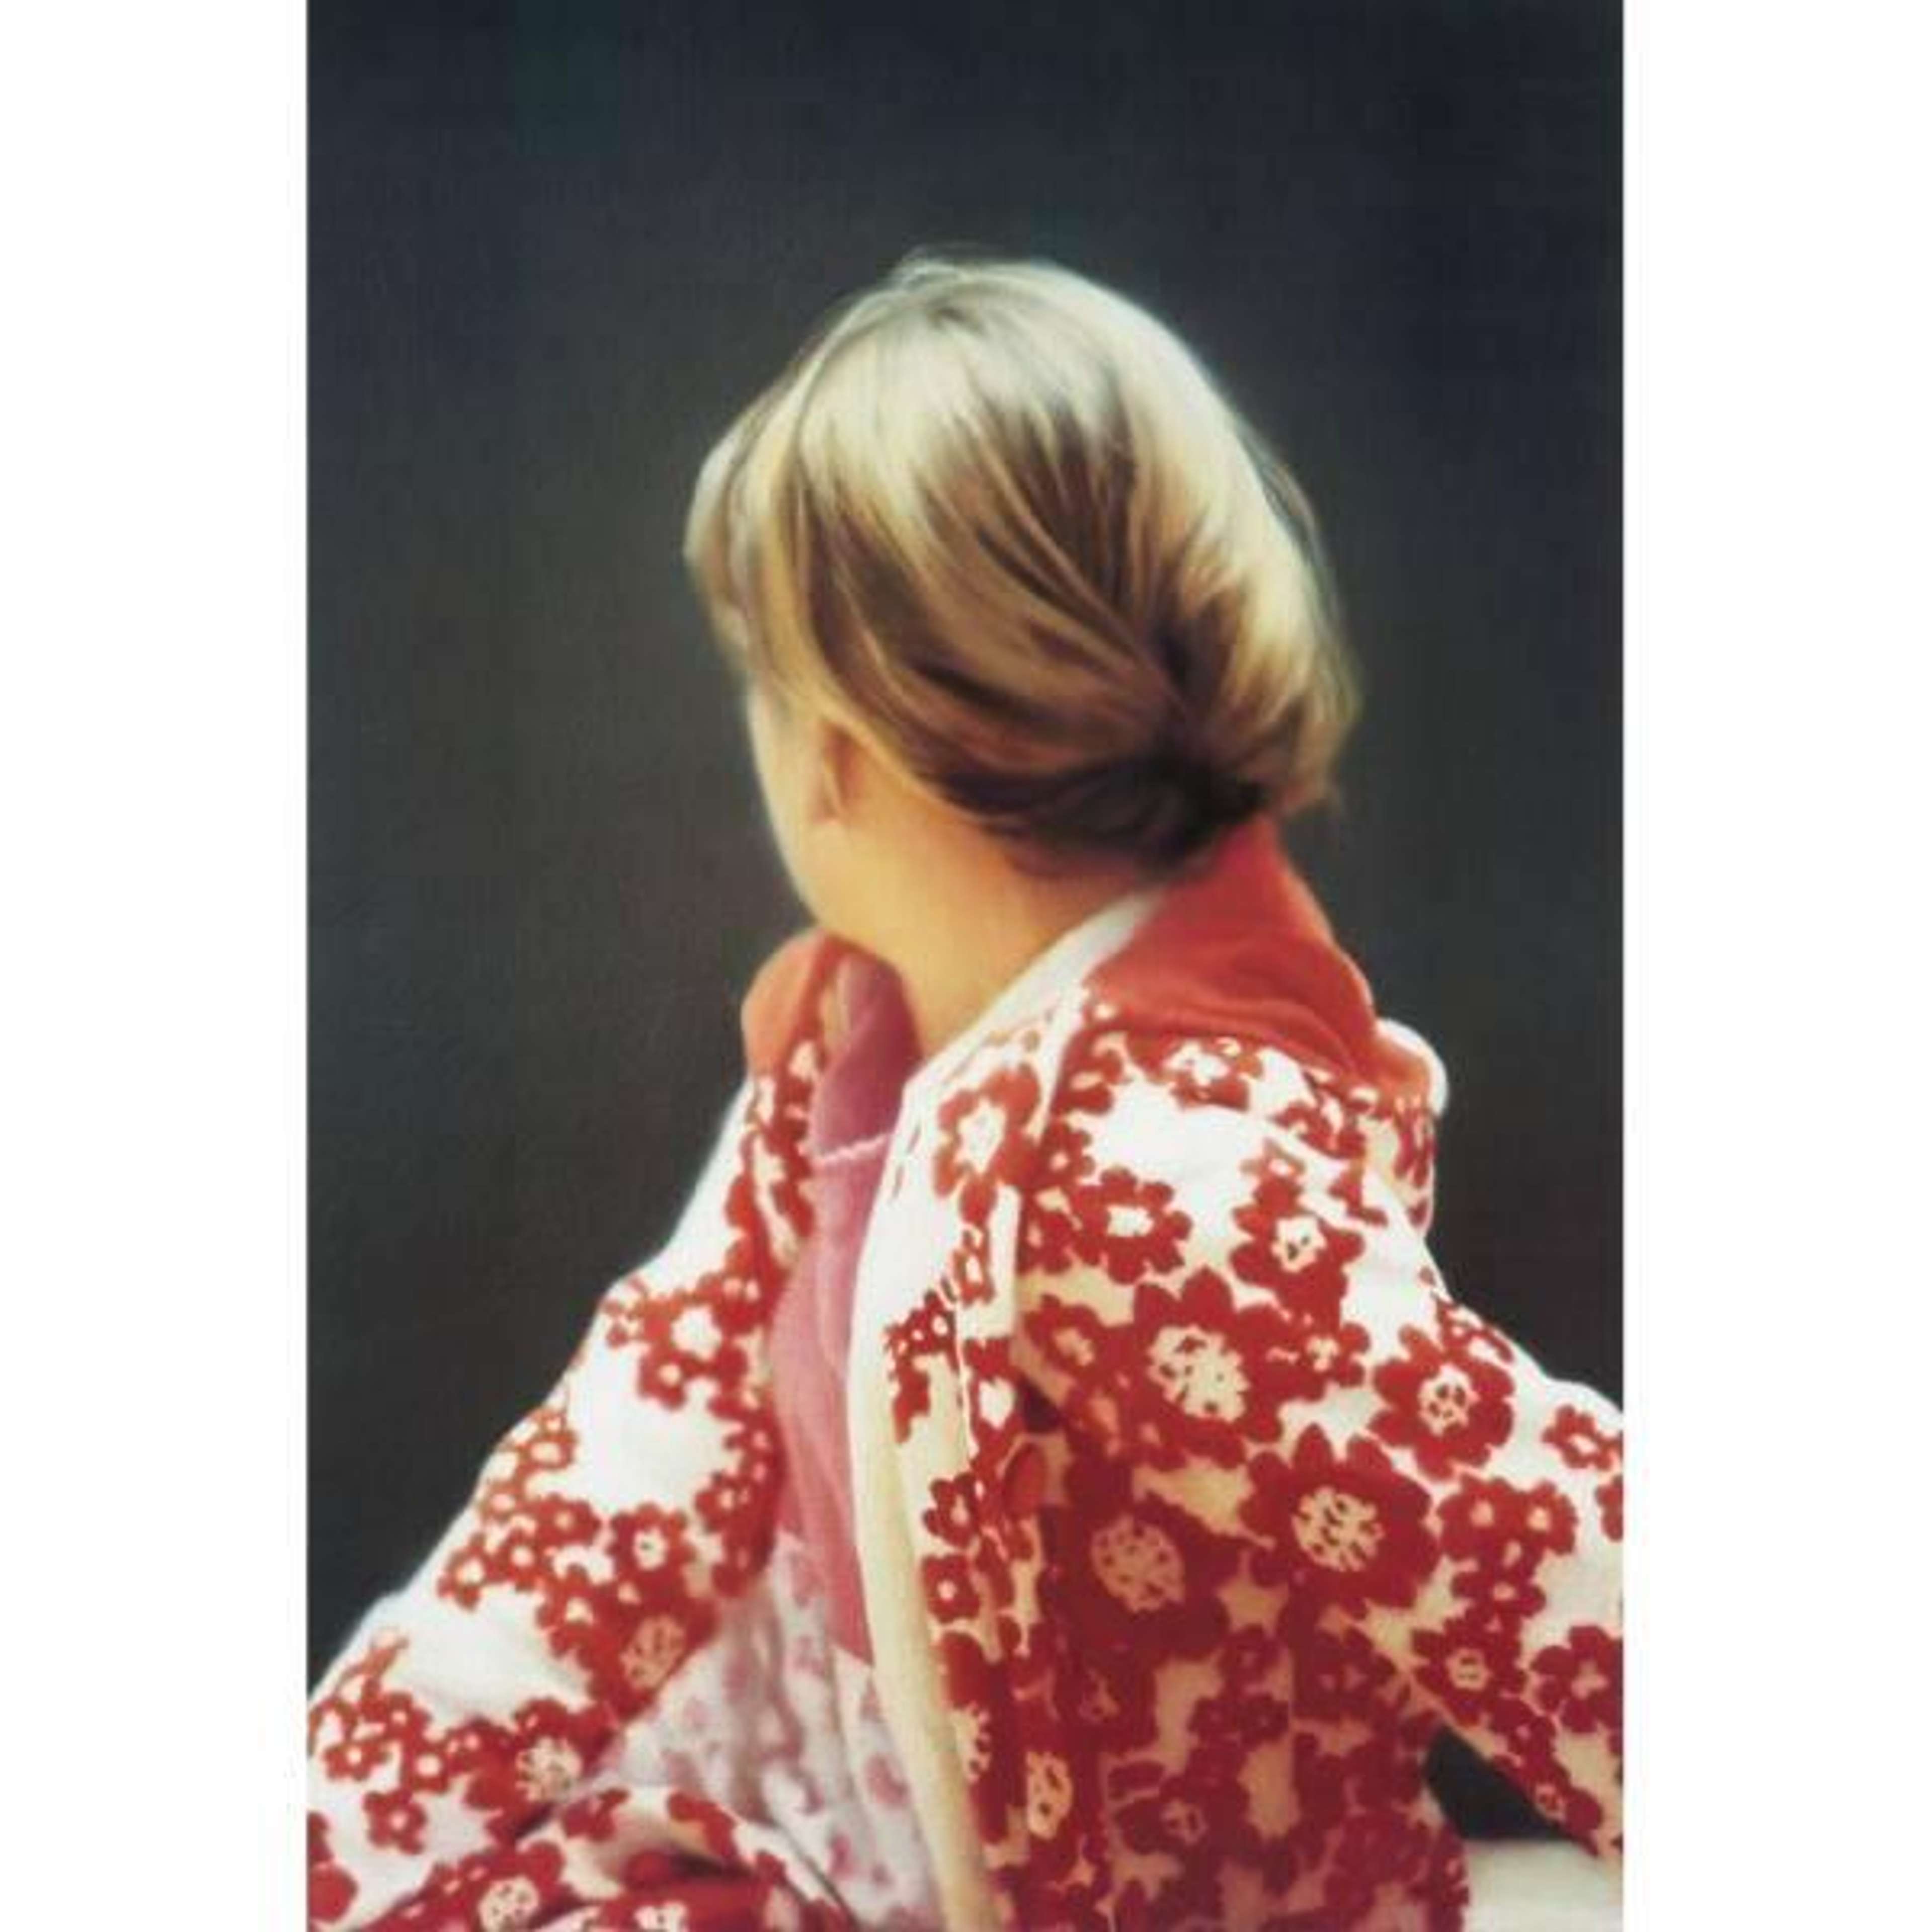 Photorealistic painting by Gerhard Richter, capturing his daughter, Betty, with her face turned away from the viewer.